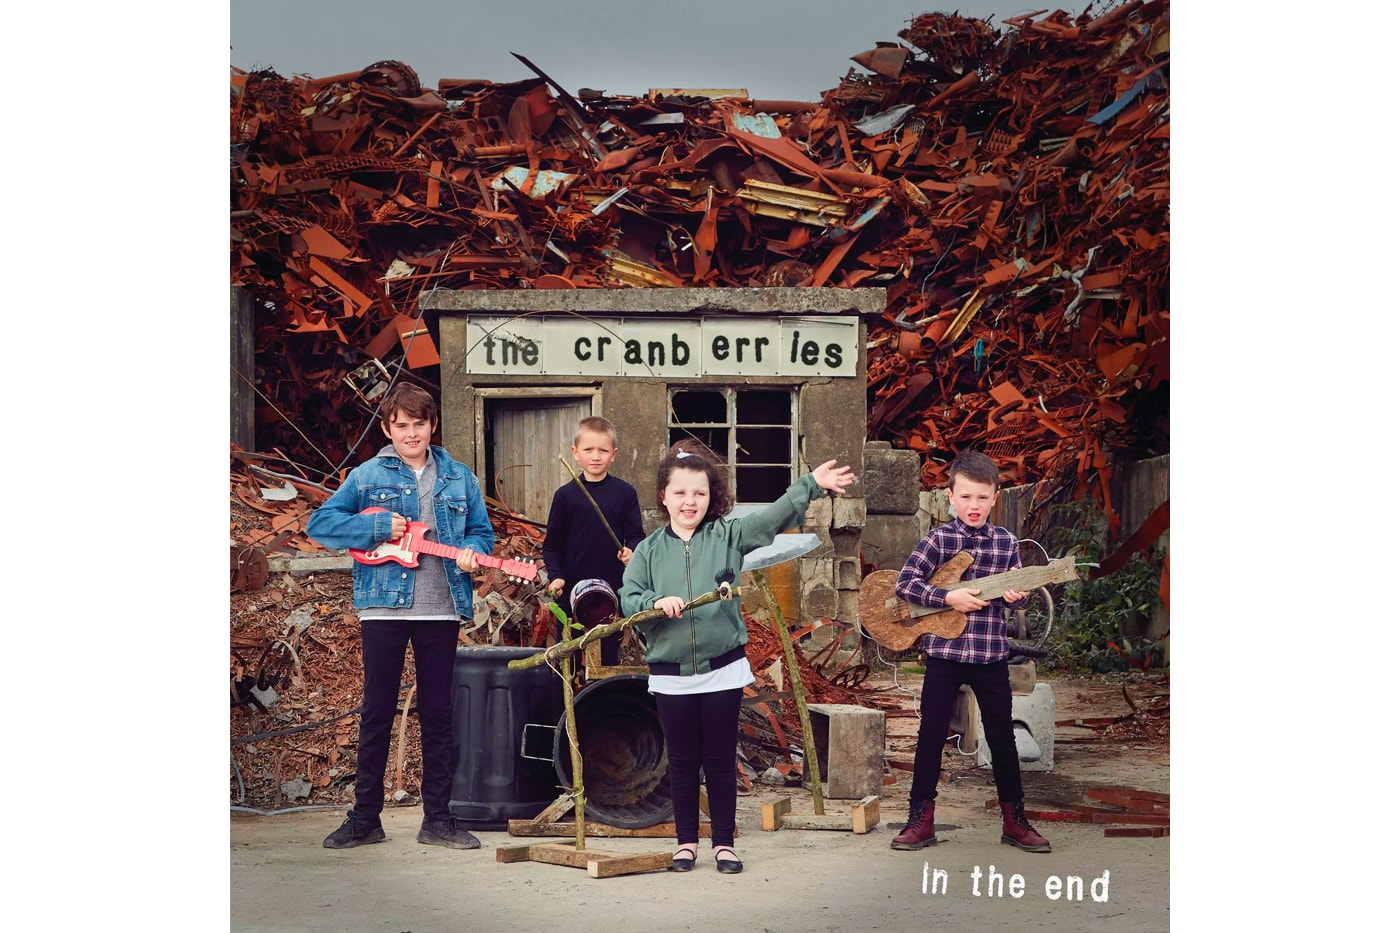 The Cranberries "In The End" Single Stream Dolores O'Riordan last song 'In the end' album lp alternative rock legend icon "linger" "dreams" 